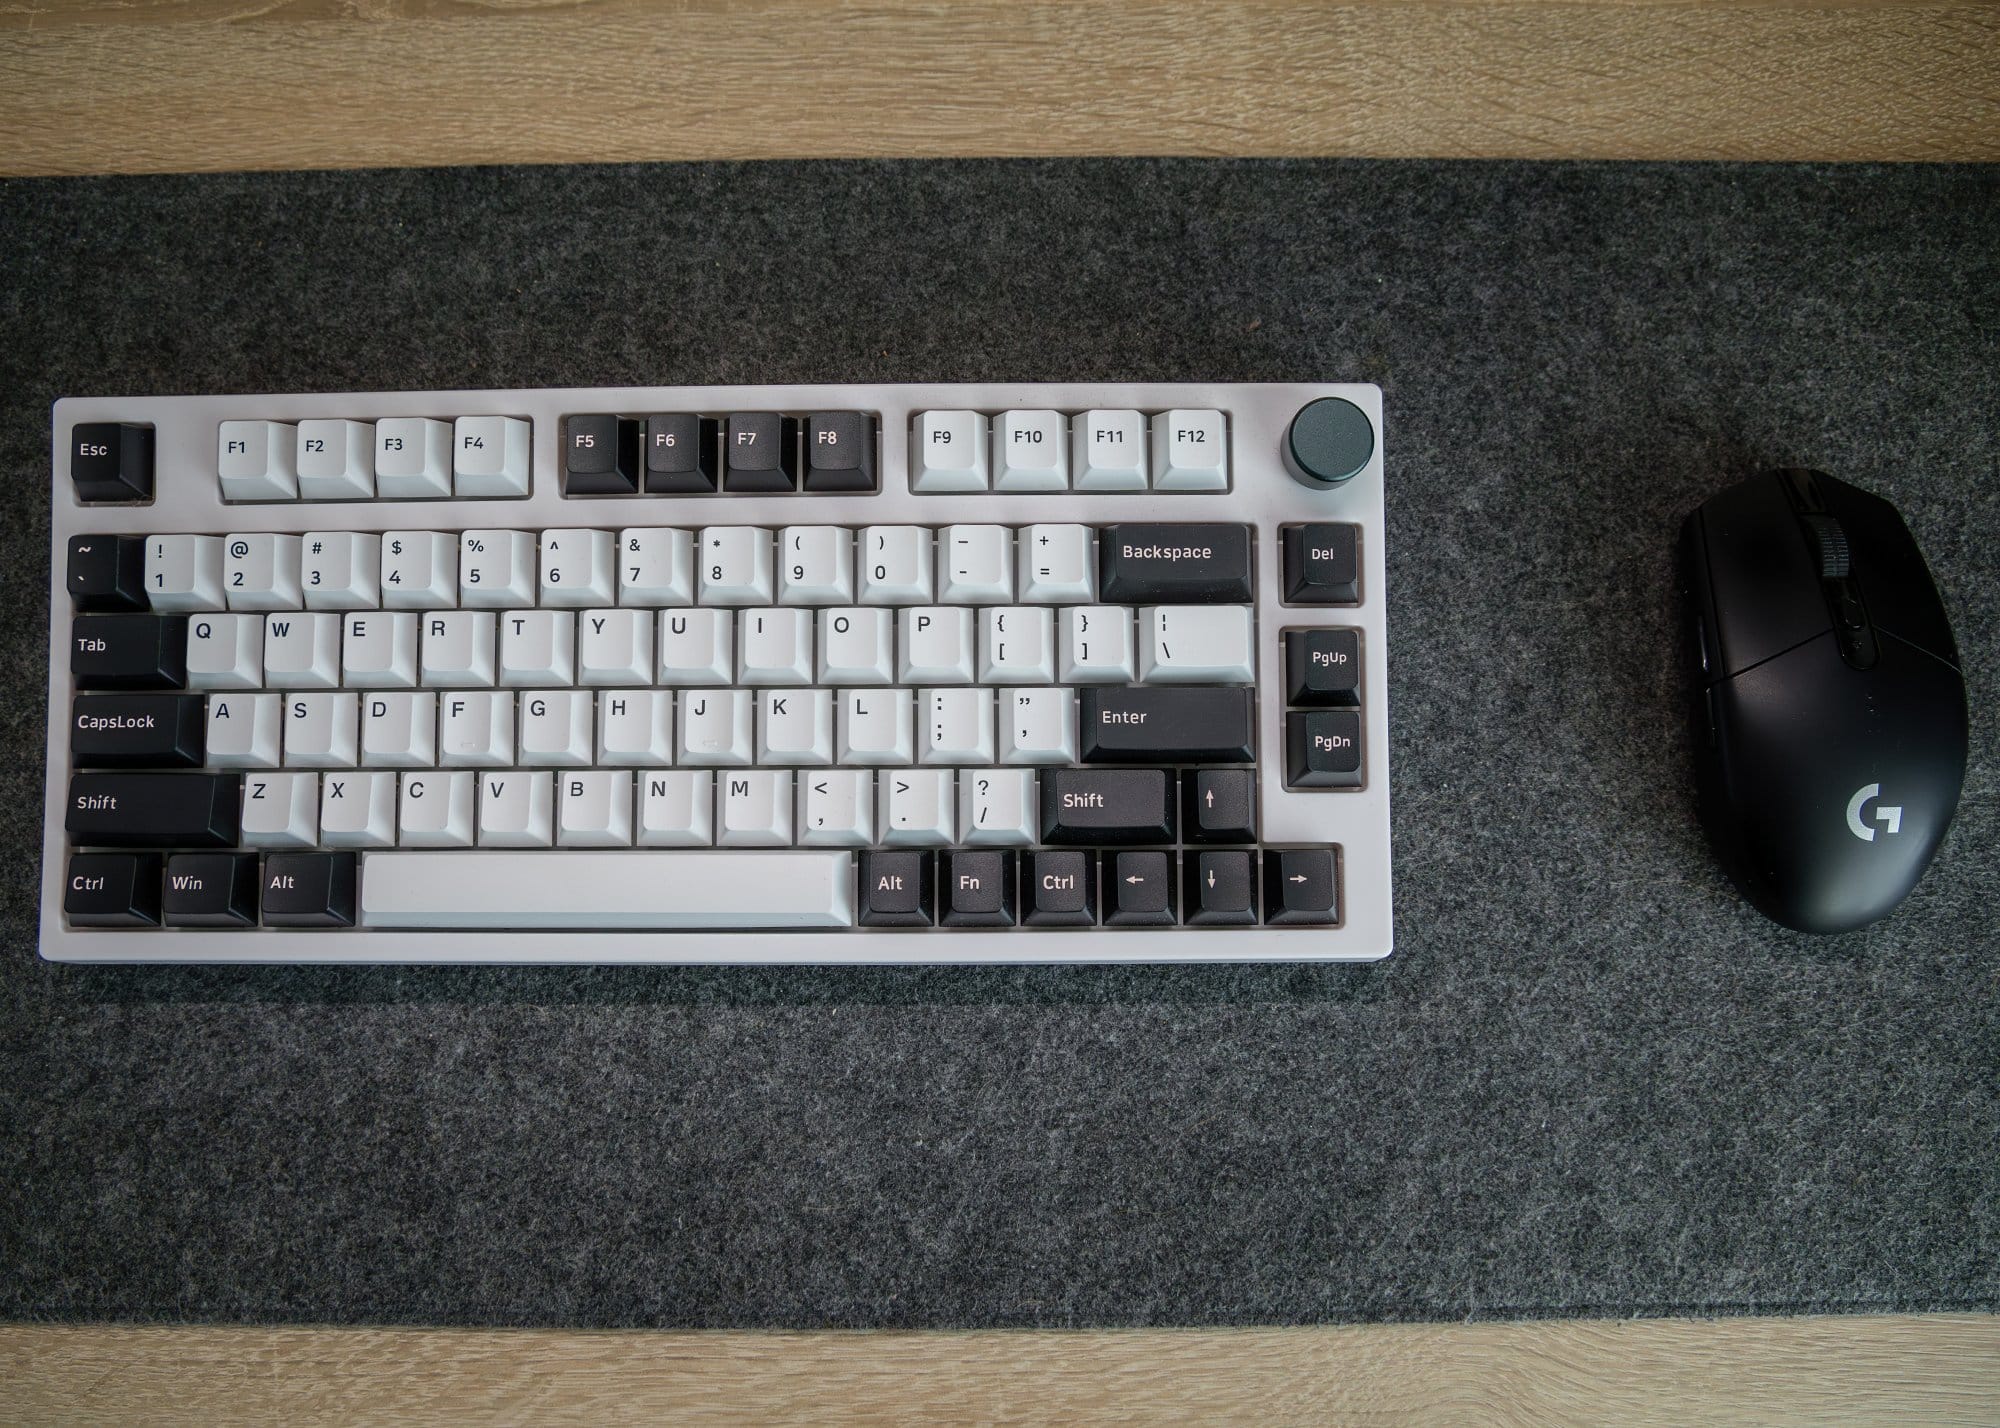 Top-down view of a mechanical keyboard with black and white keys alongside a wireless black gaming mouse, both resting on a grey felt desk mat on a wooden surface